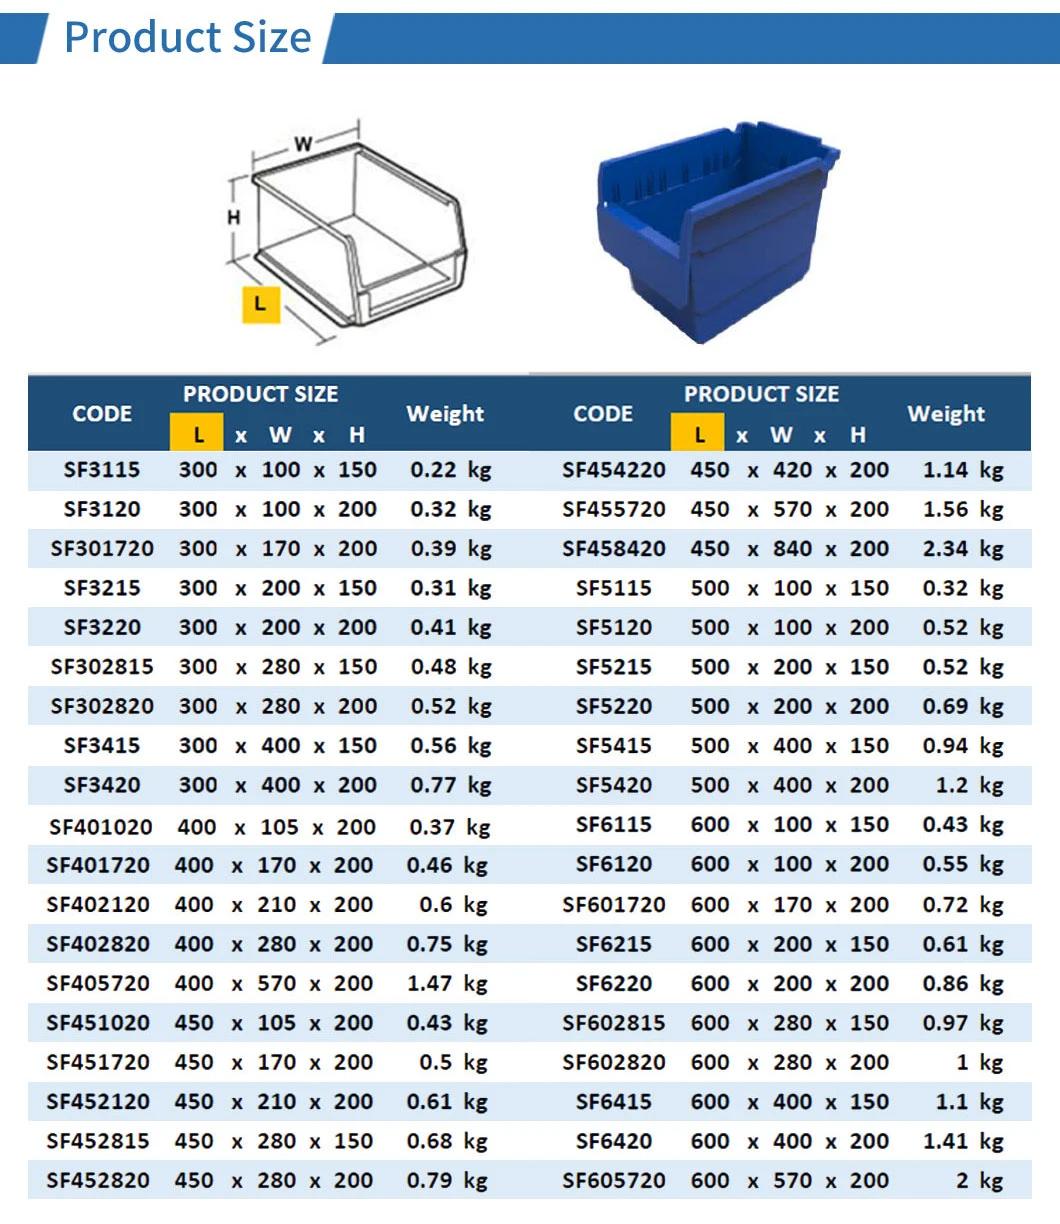 300*100*150mm High Quality Deep Blue Customized Stackable Organizing Plastic Shelf Warehouse Storage Box/Bin/Container for Shelves